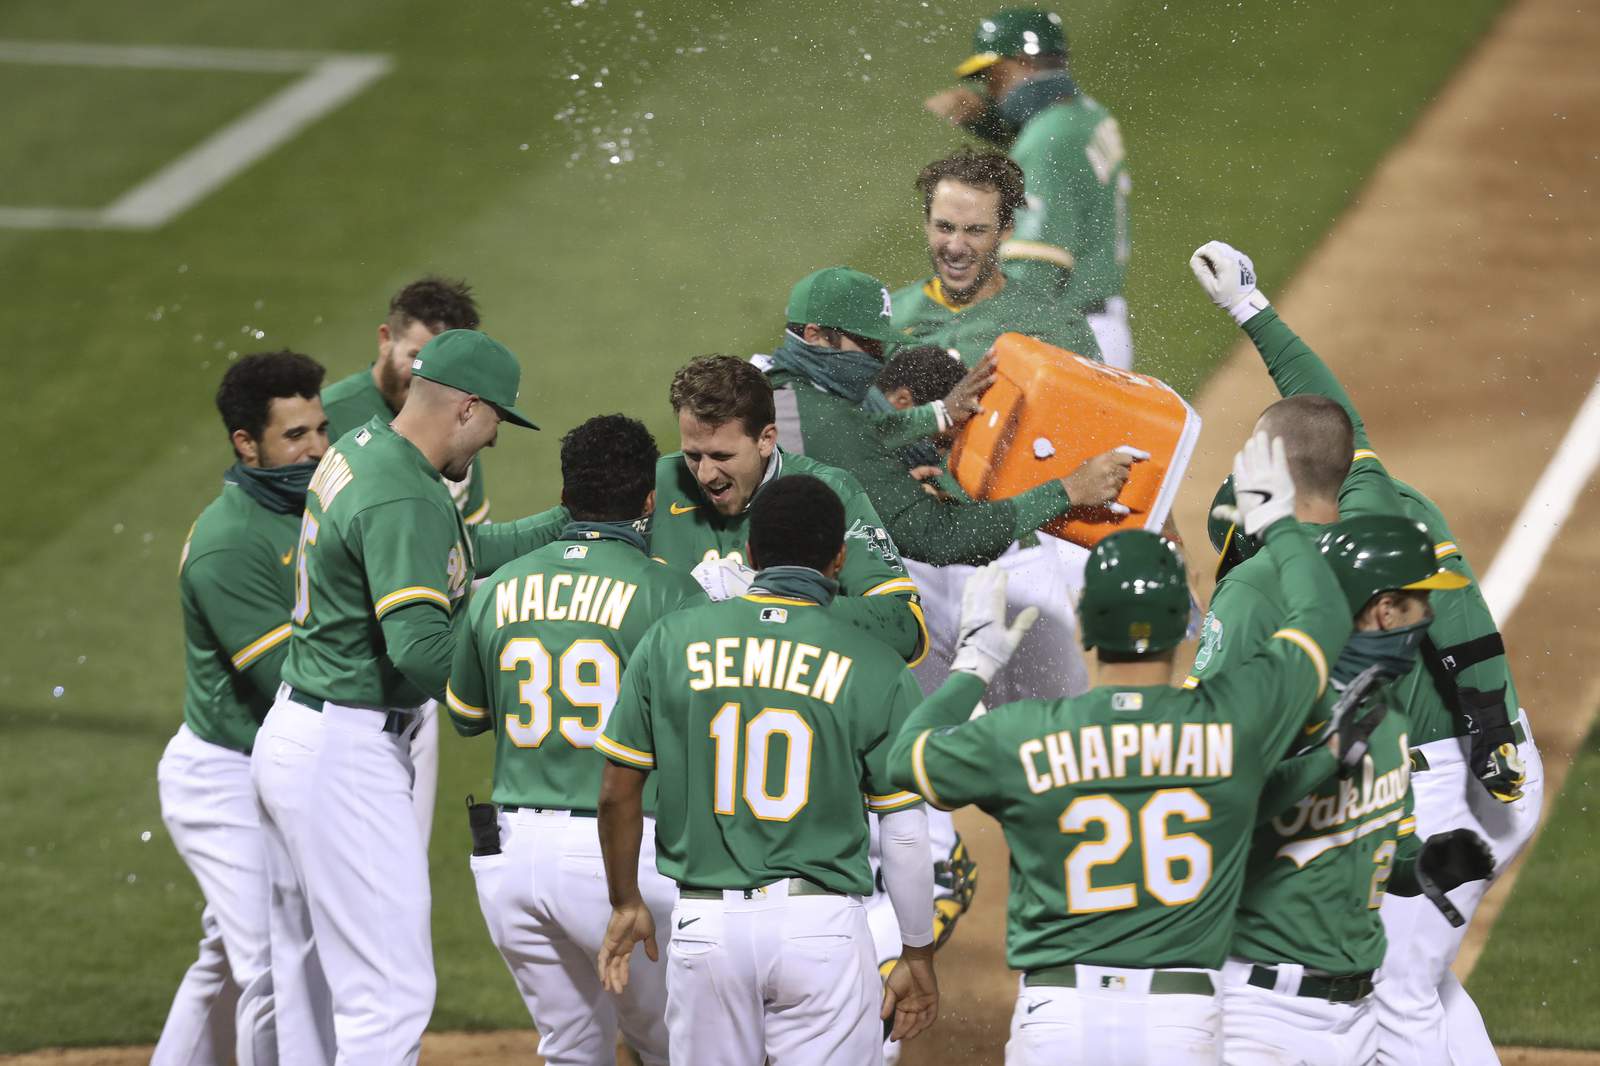 Piscotty hits A's 2nd walkoff slam this year, beats Rangers